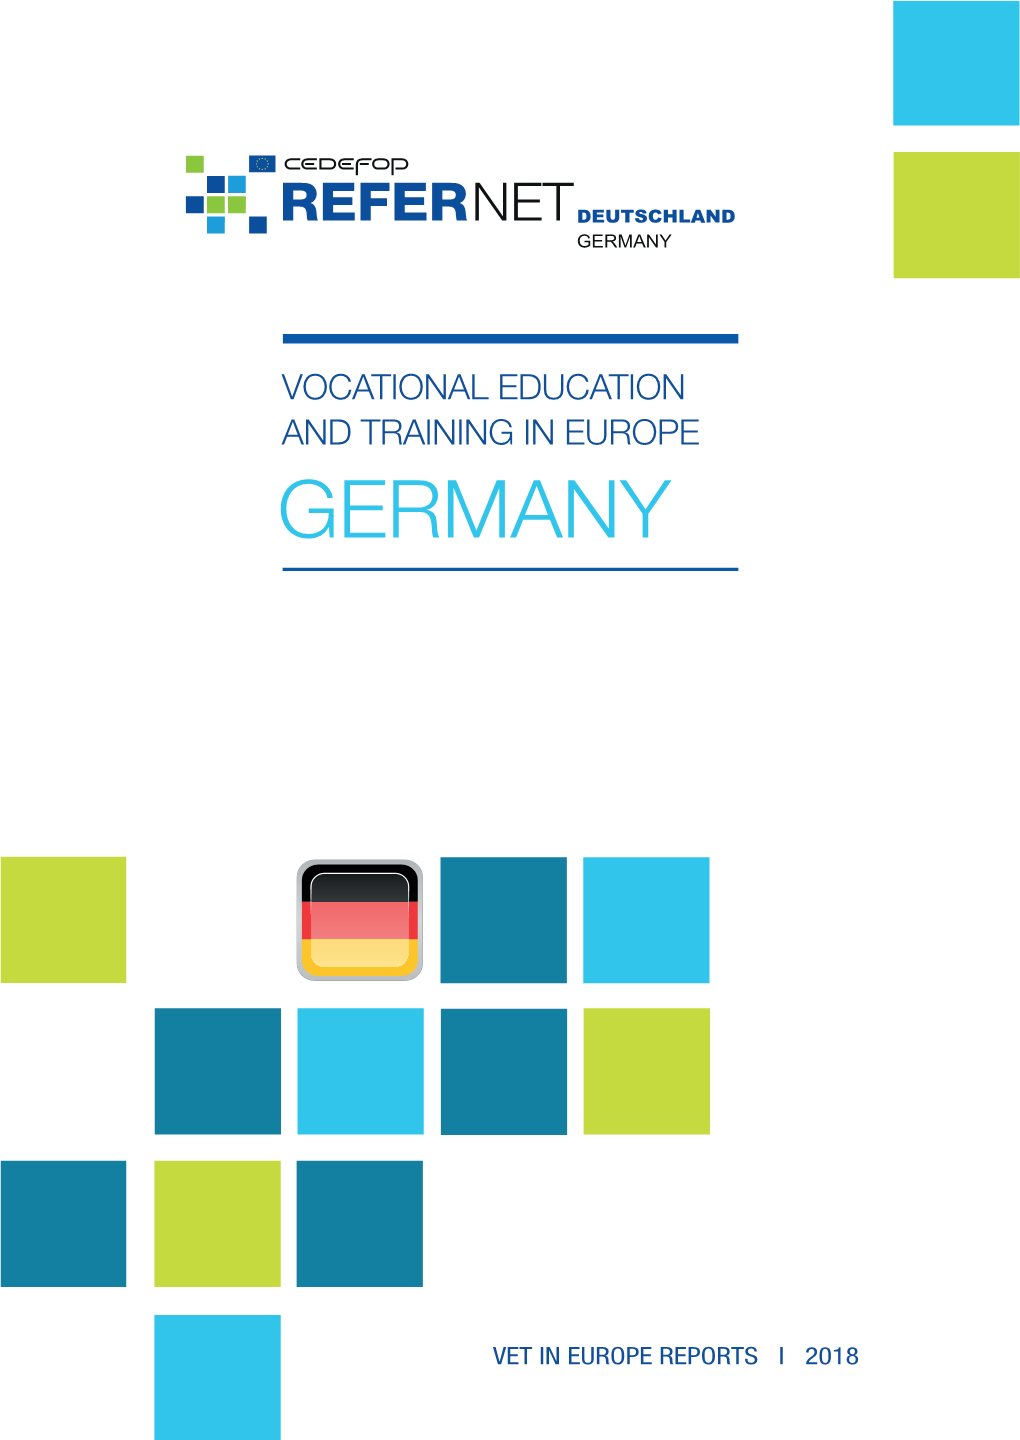 Vocational Education and Training in Europe Germany